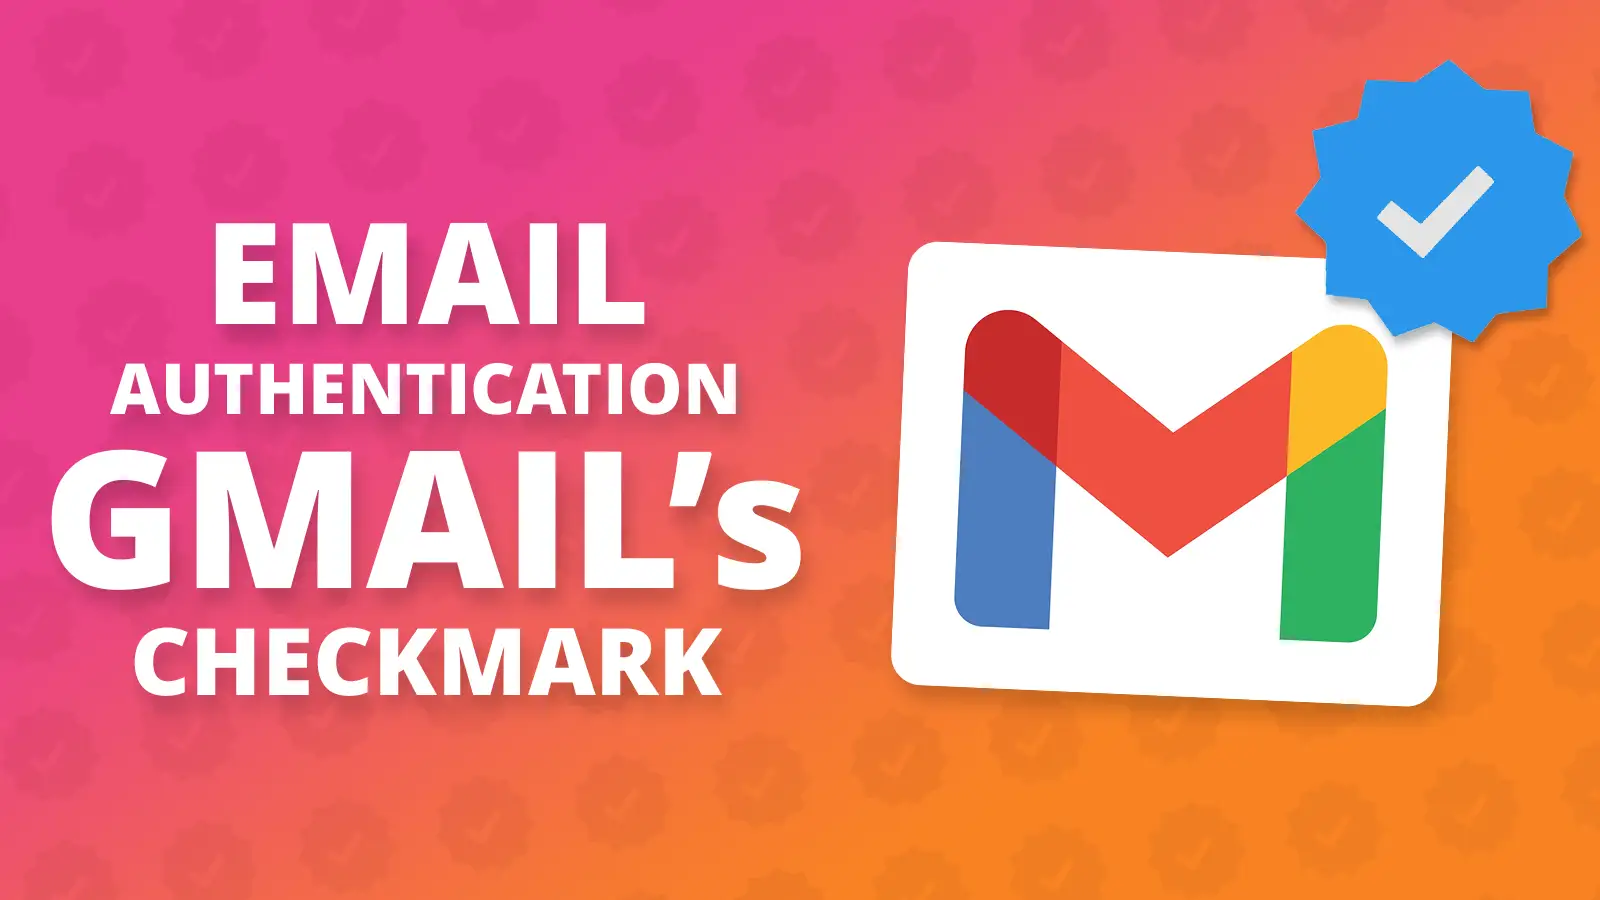 Email Authentication: Gmail's checkmark